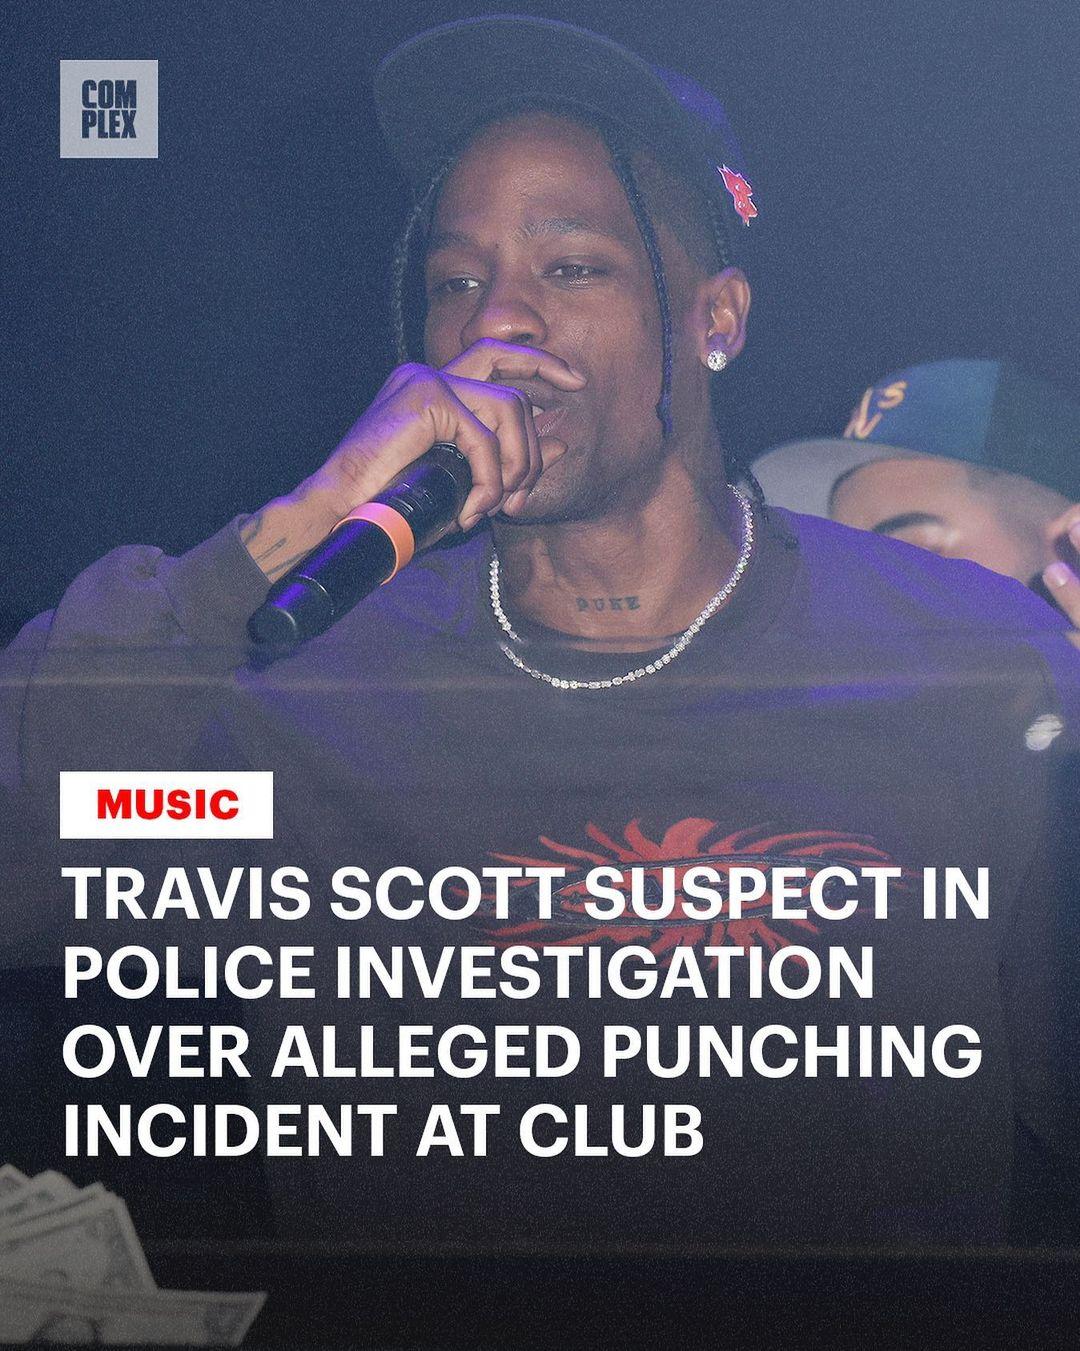 class="content__text"
 Travis Scott has reportedly been named as a suspect of an investigation into an alleged punching incident at a club in New York City. Link in bio 🔗 full story 
 